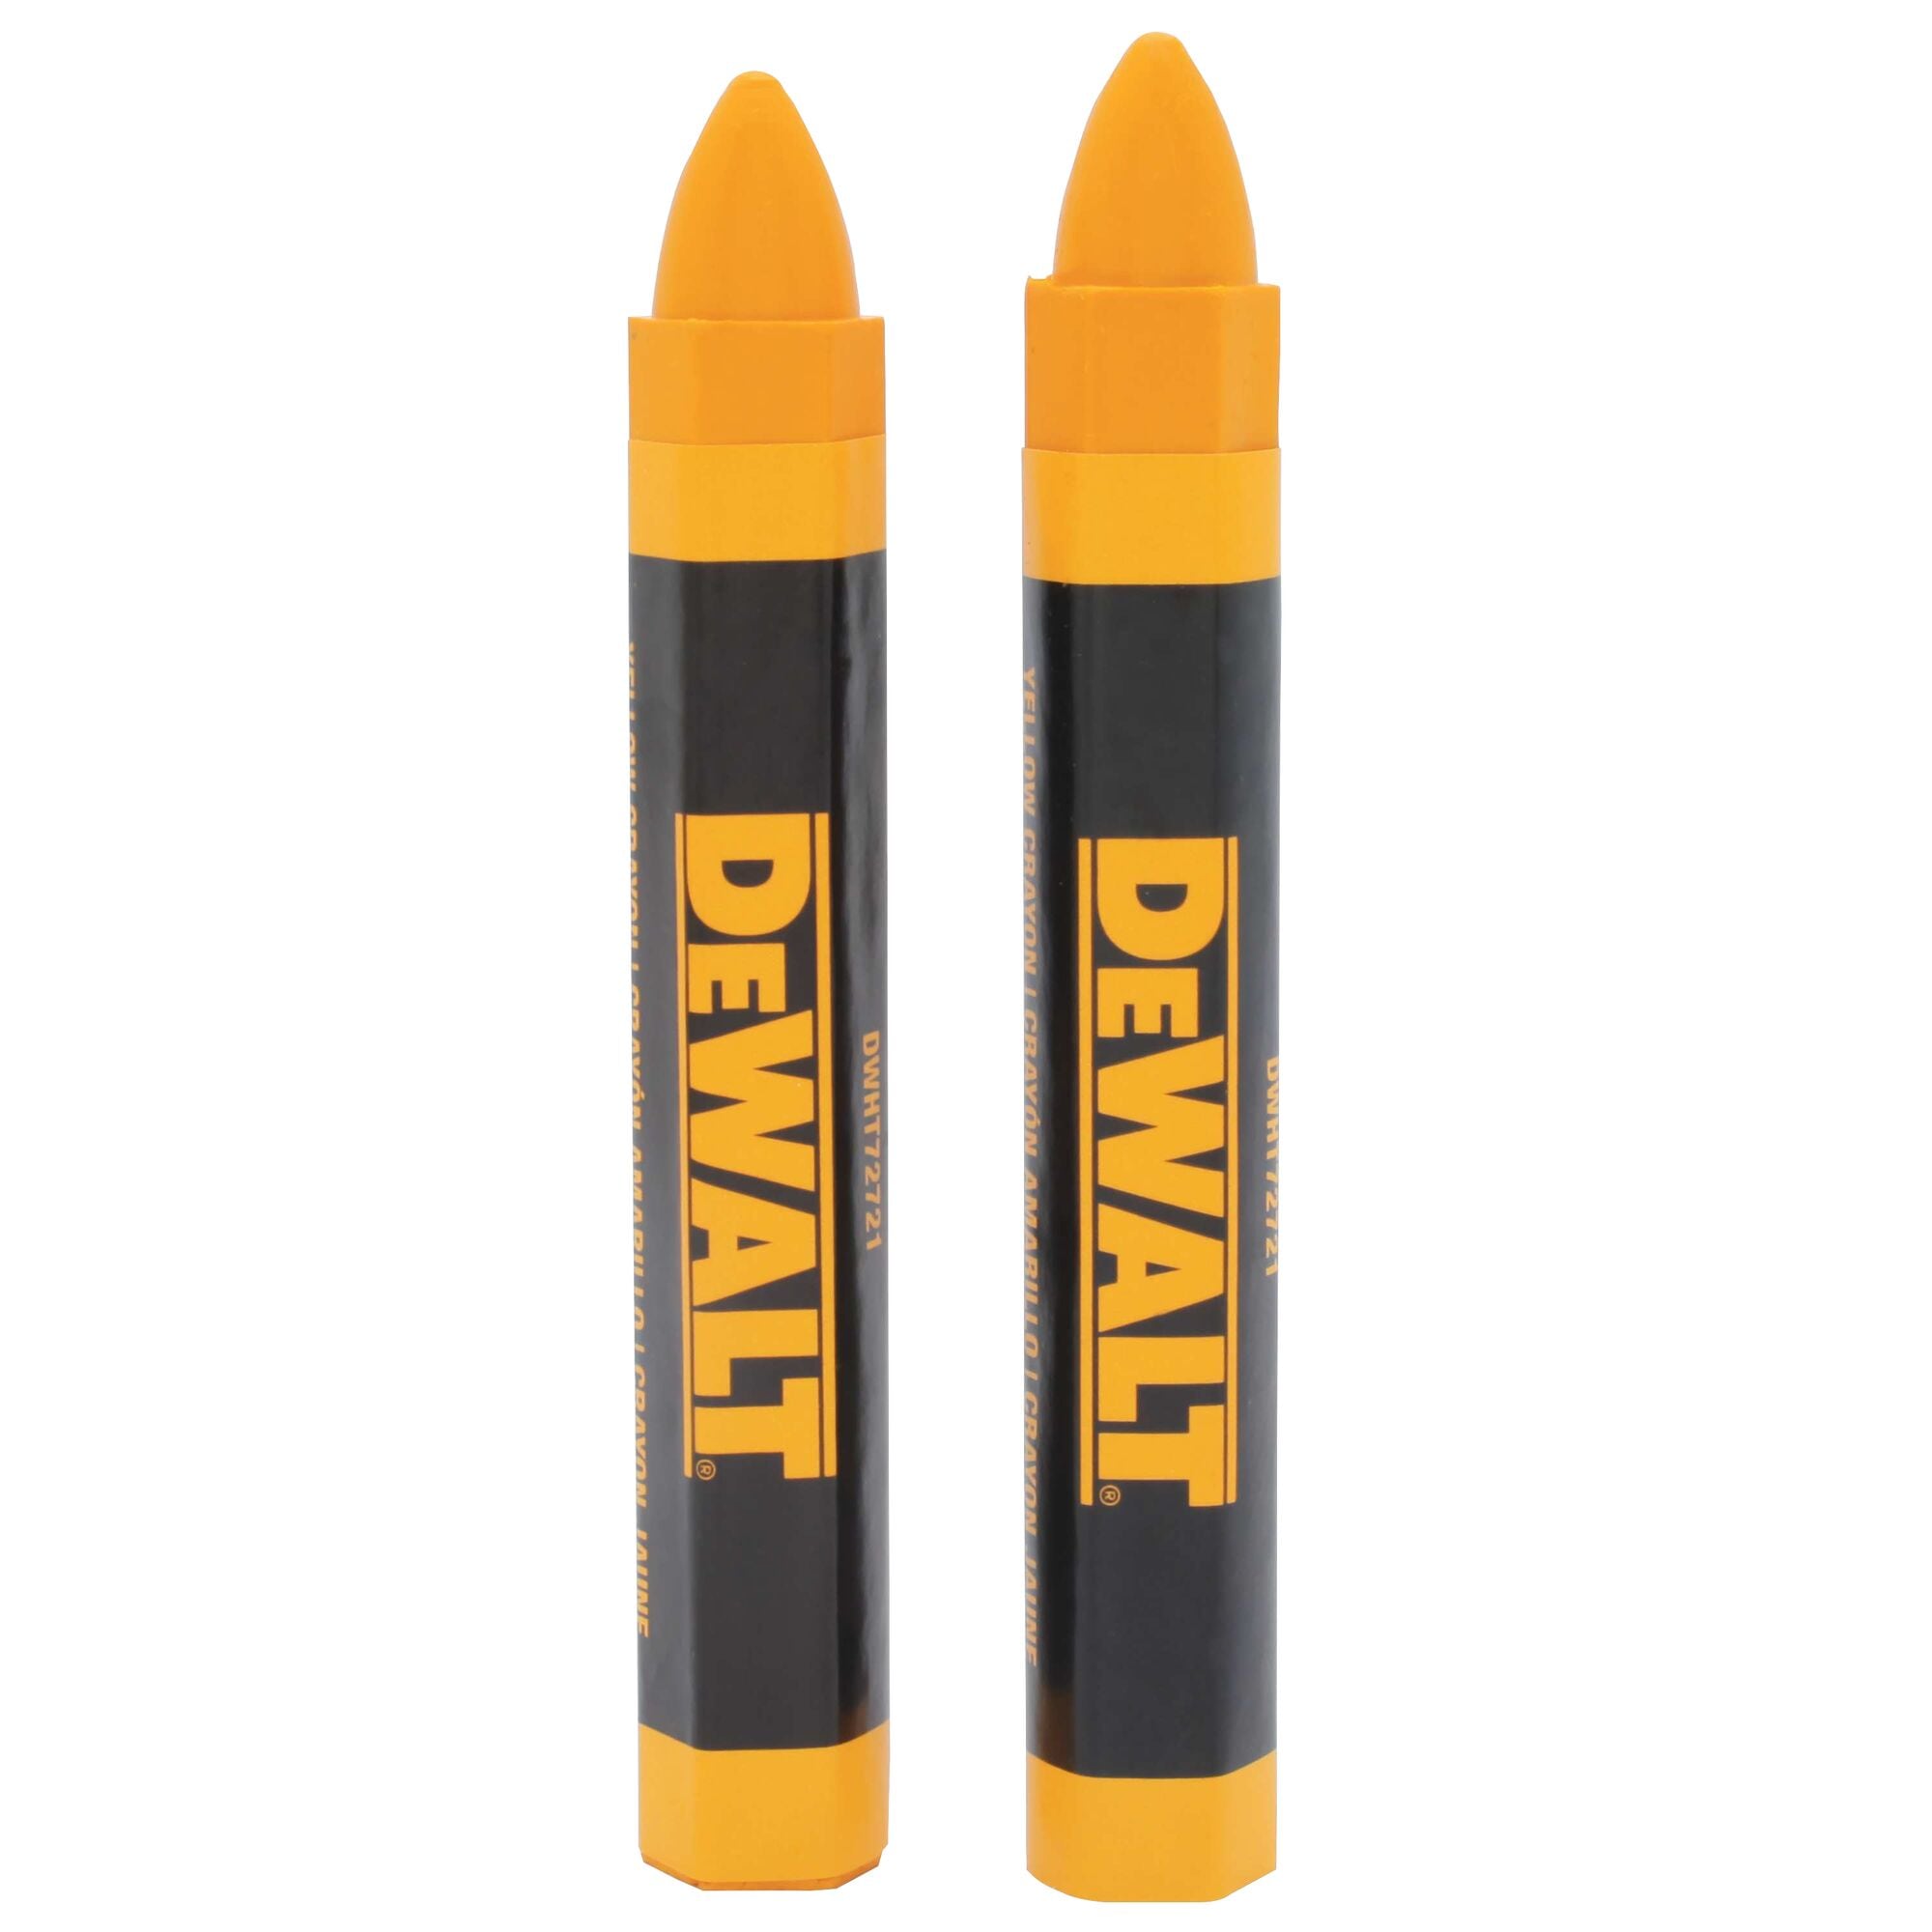 LC-YW Yellow Lumber Crayon Clay Based Marker